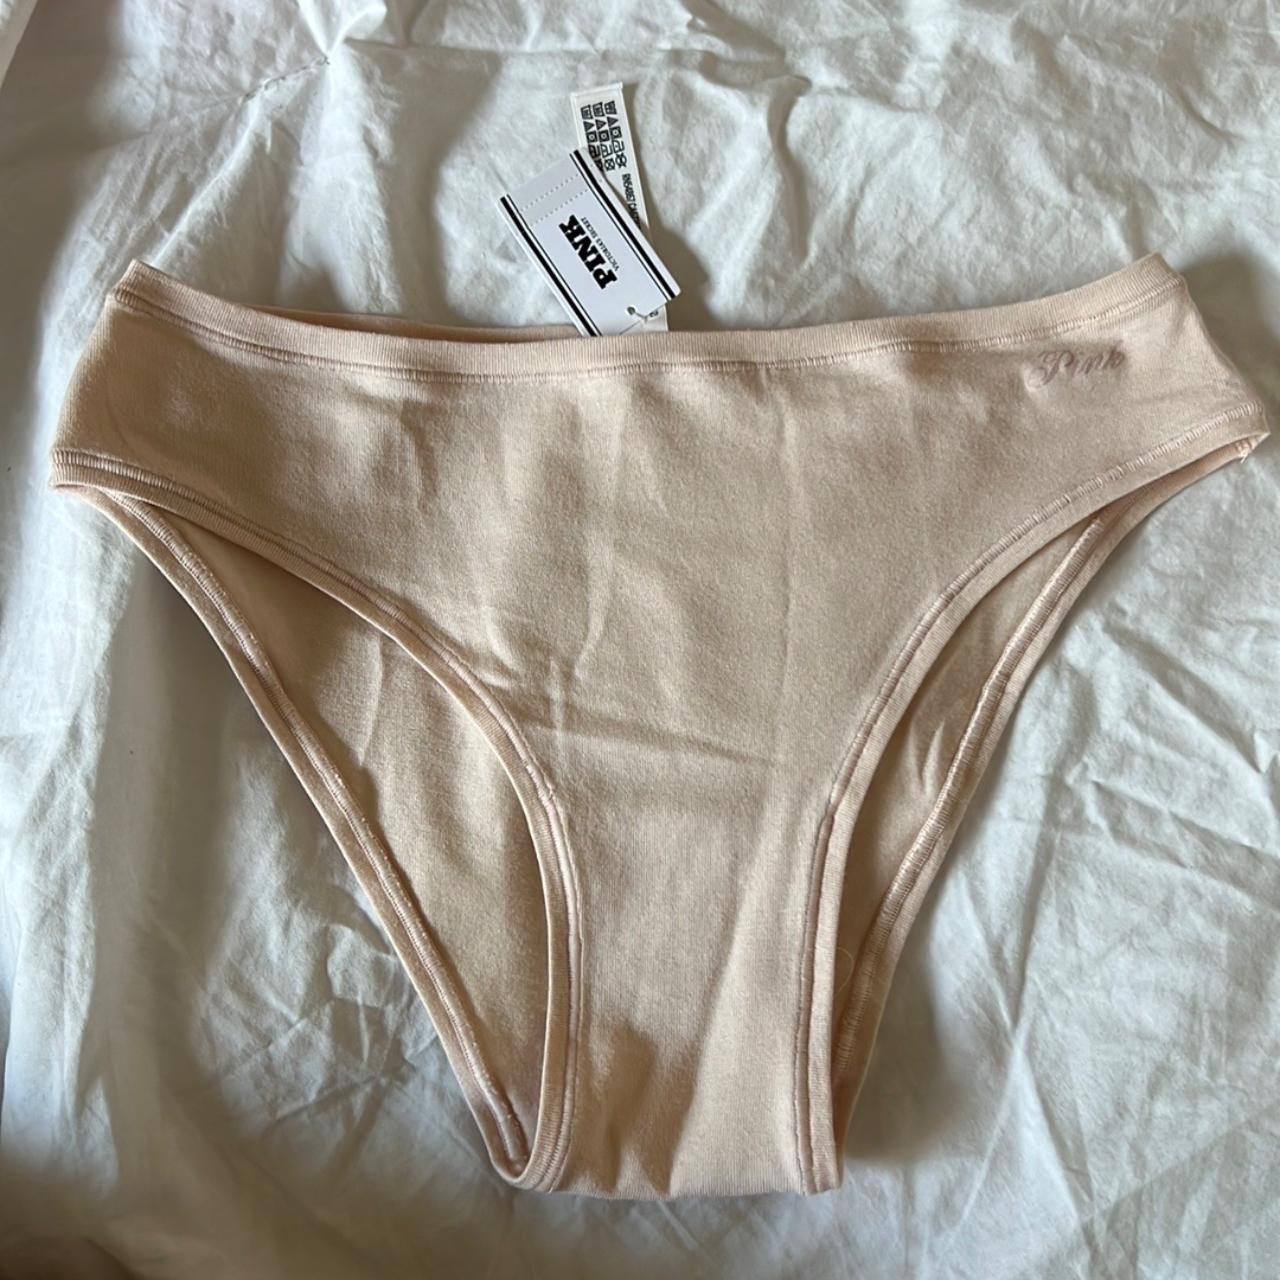 NEW TAGS Victoria Secret Thong & Cheeky Panties Women's Size Small